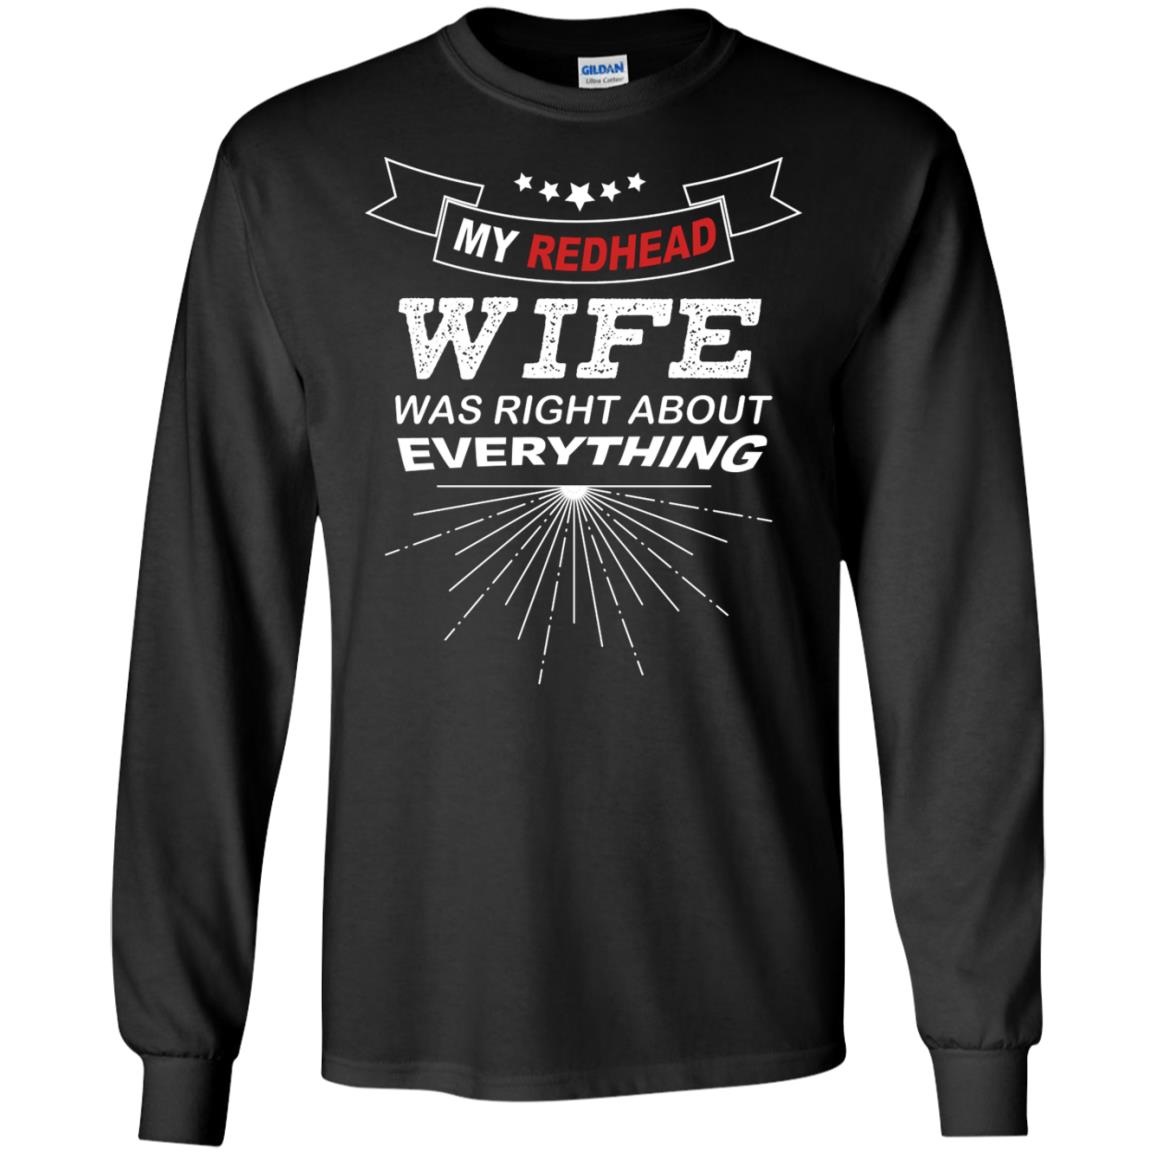 My Redhead Wife Was Right About Everything Shirt For HusbandG240 Gildan LS Ultra Cotton T-Shirt